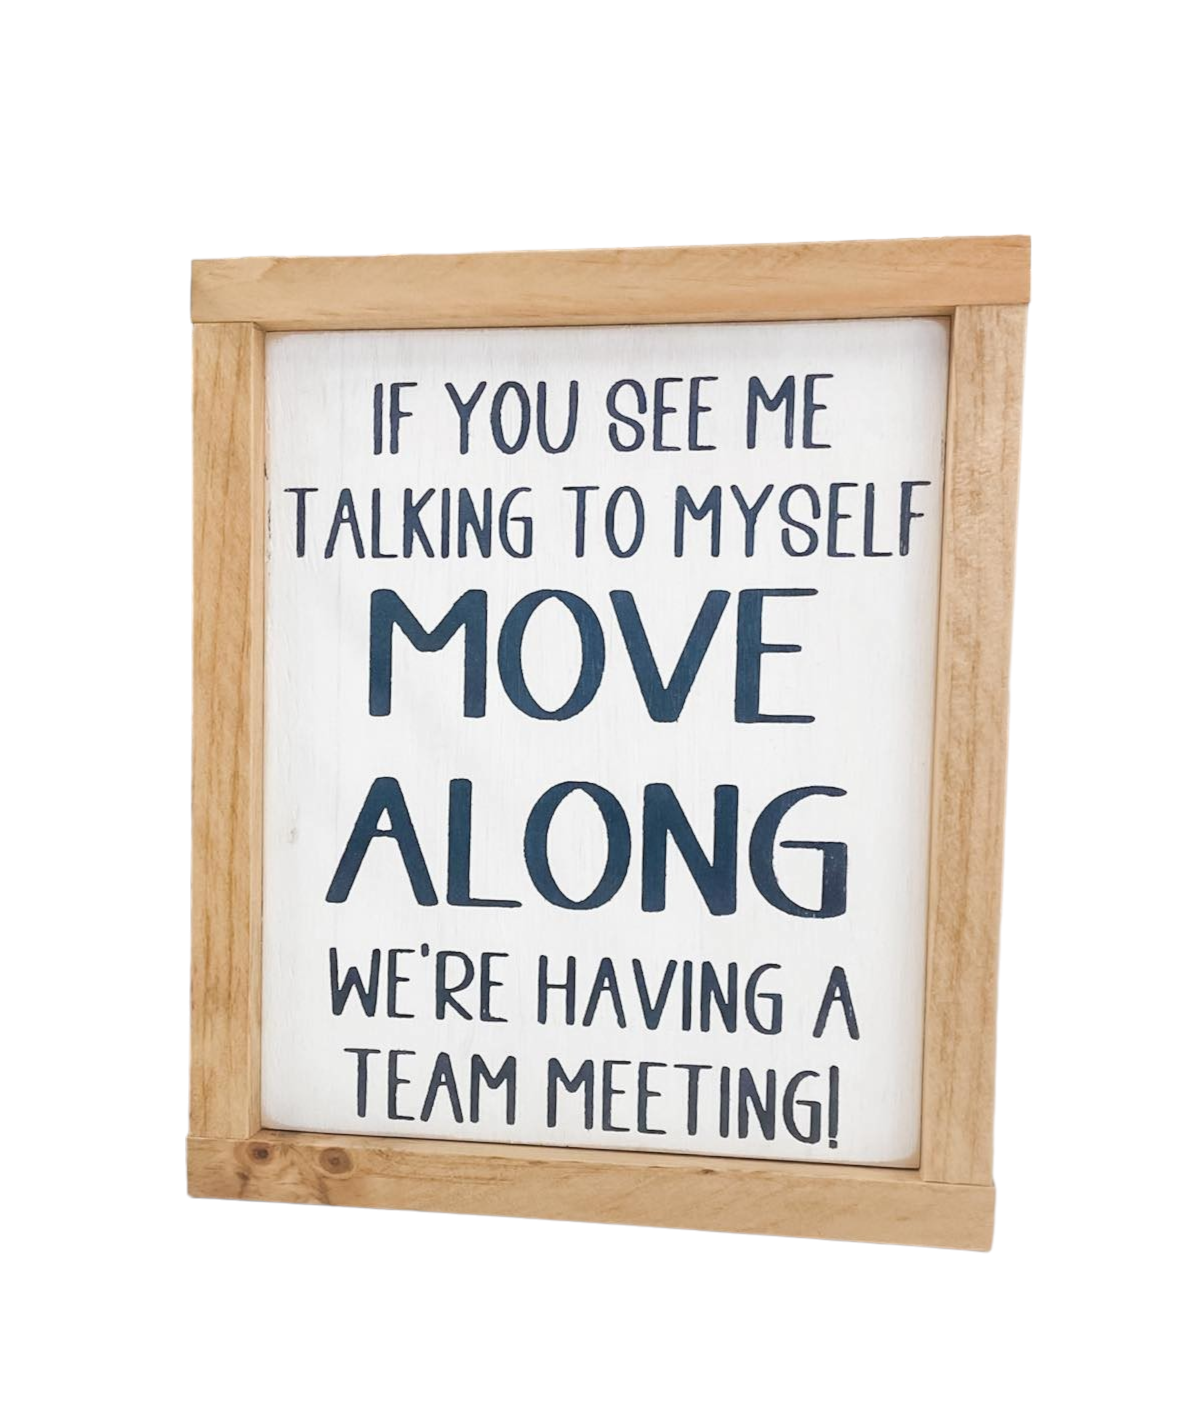 A framed wooden sign measuring 8" x 9.25". The sign features the humorous text, 'If you see me talking to myself, move along, we're having a team meeting.' This funny wood sign makes a great coworker gift and adds a playful touch to any office space.